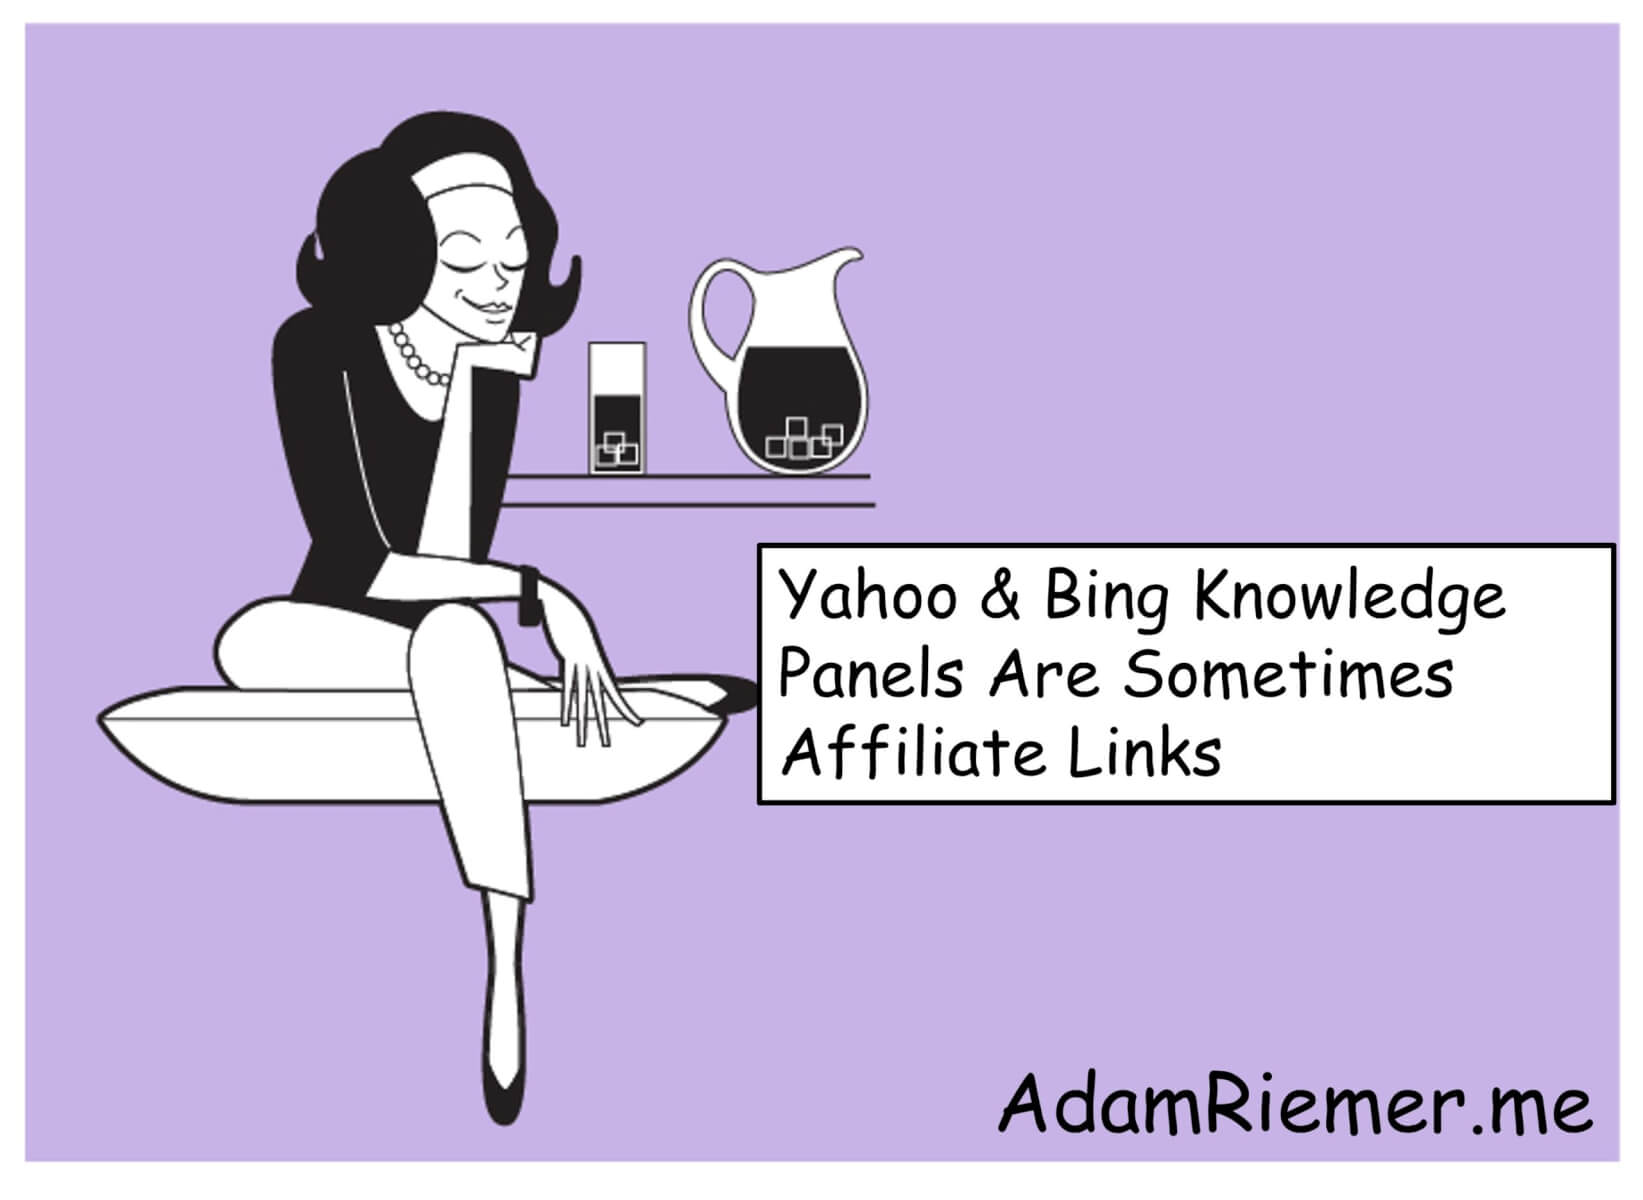 Yahoo & Bing Knowledge Panels Are Sometimes Affiliate Links